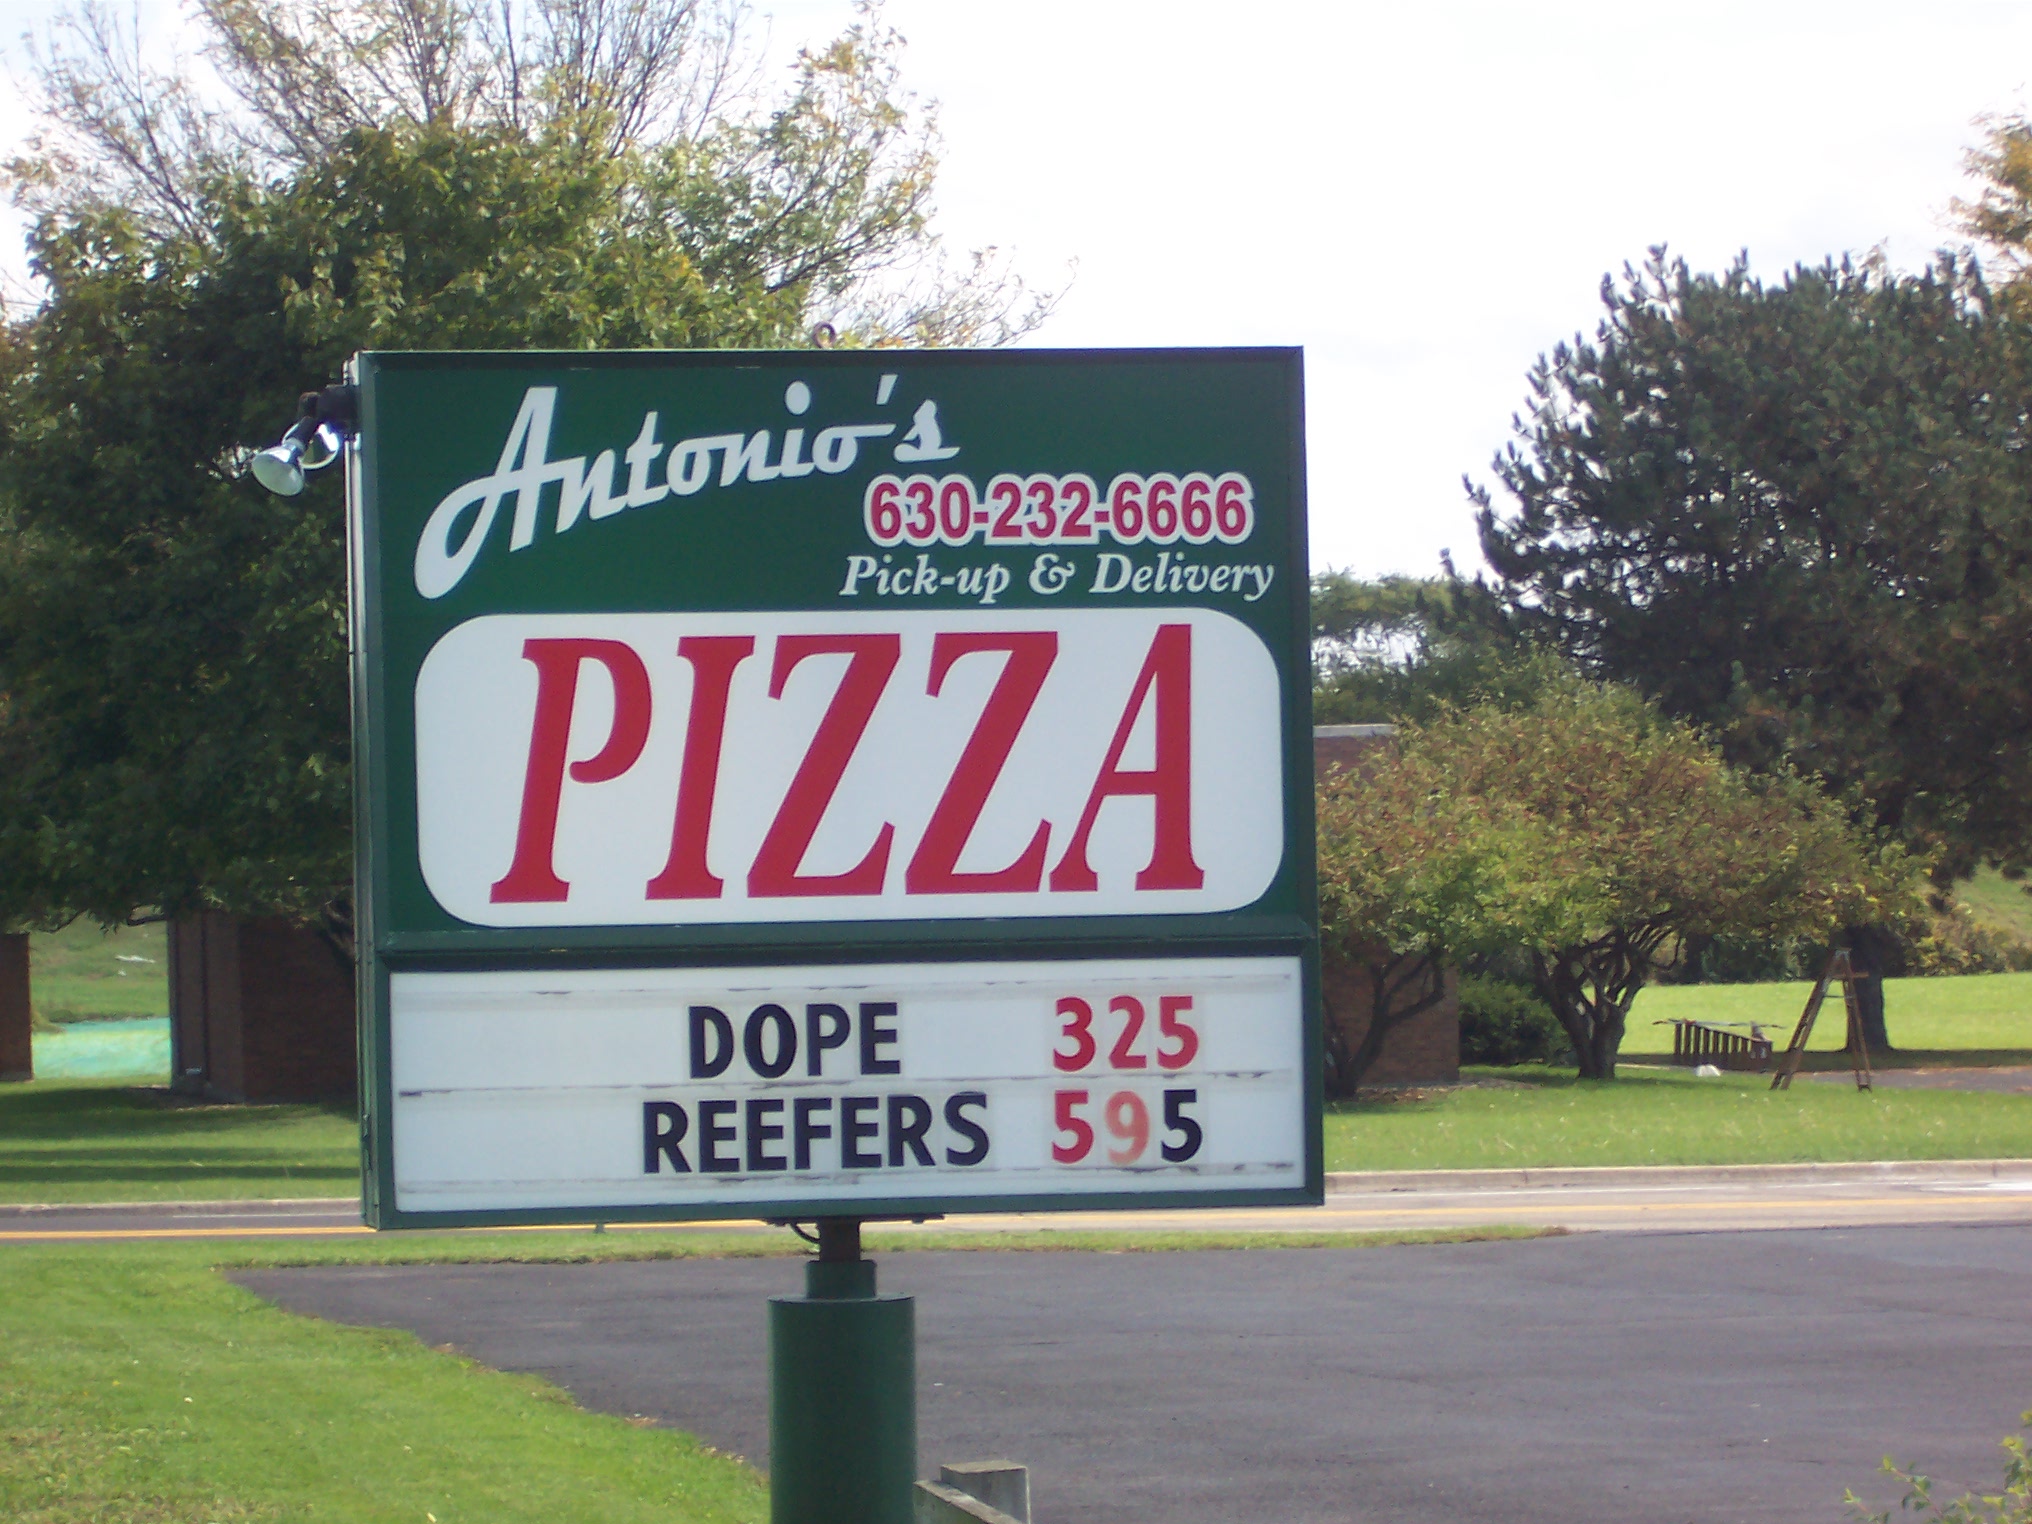 Someone changed the pizza sign